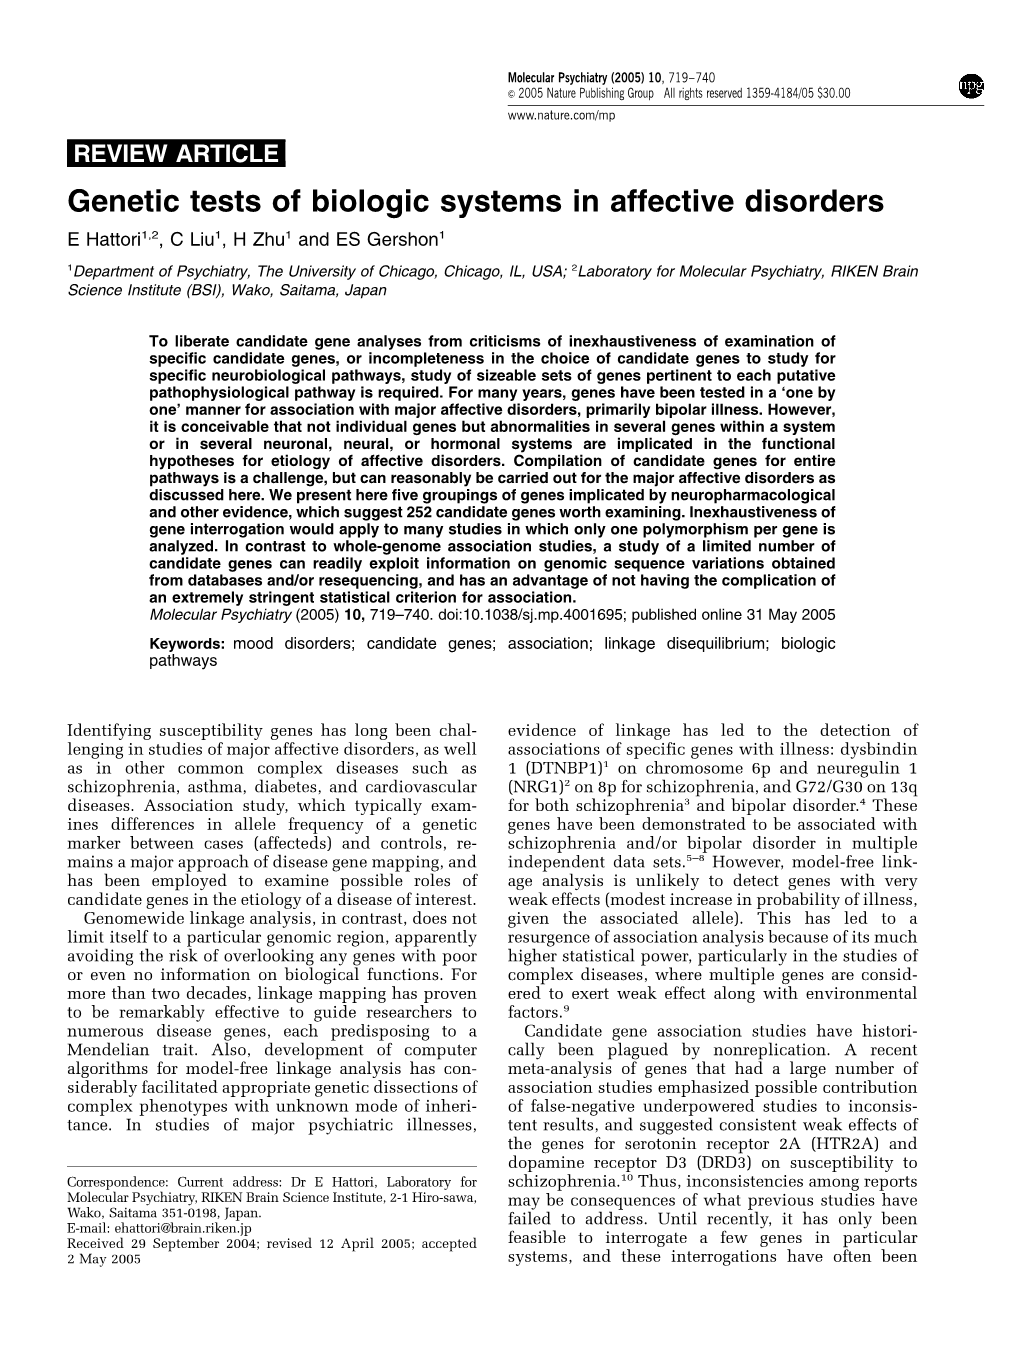 Genetic Tests of Biologic Systems in Affective Disorders